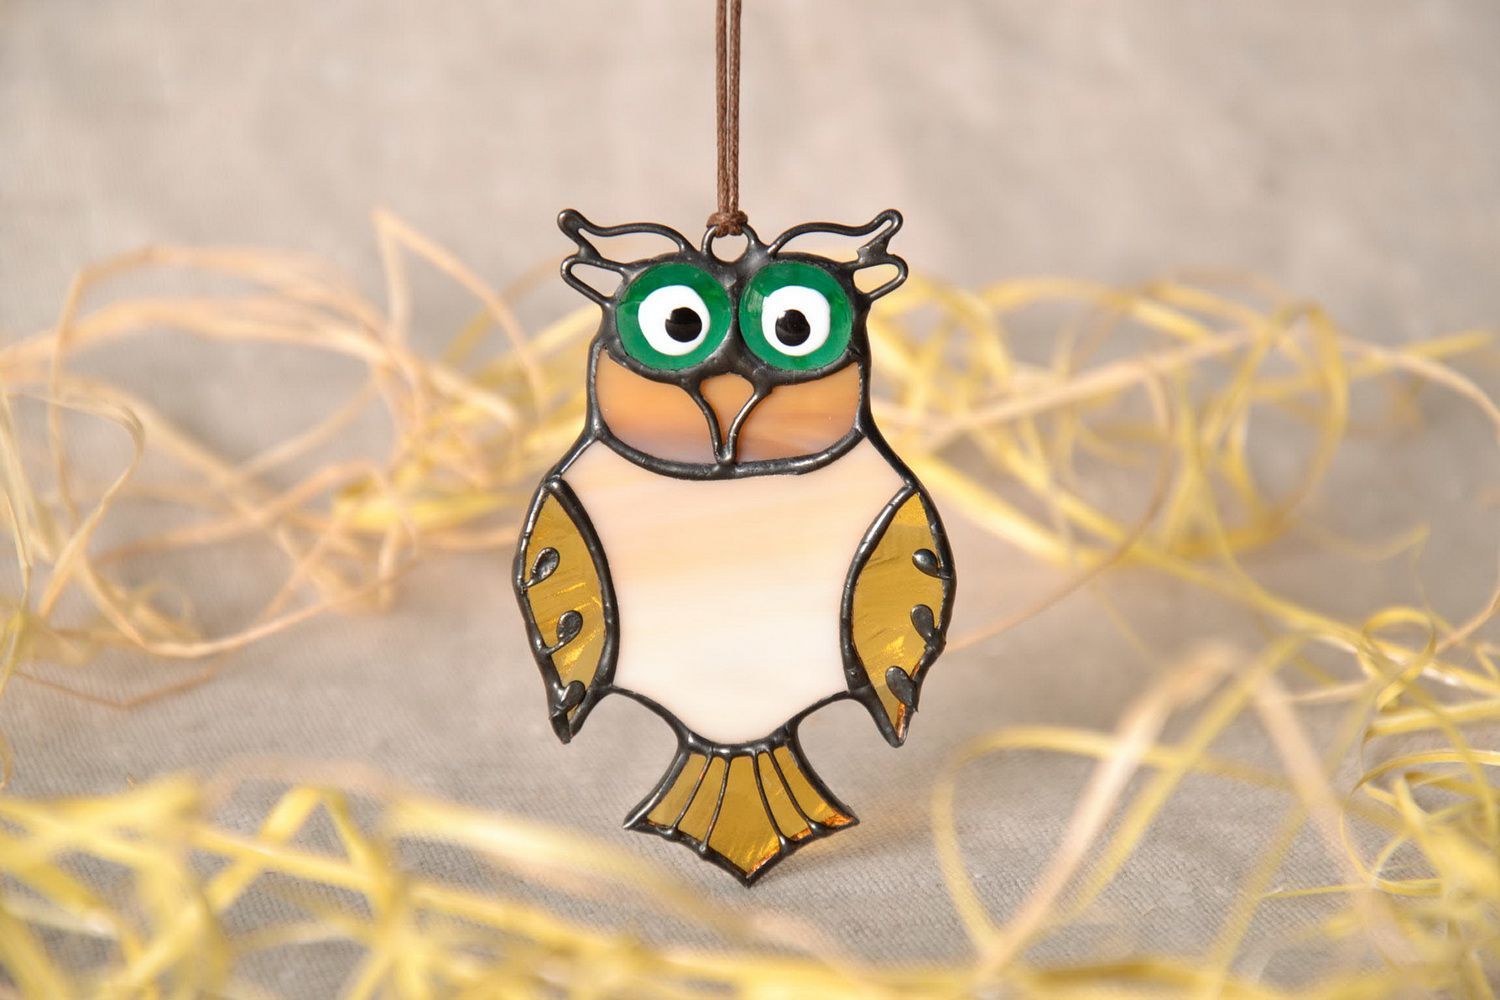 Interior stained glass pendant Owl photo 2